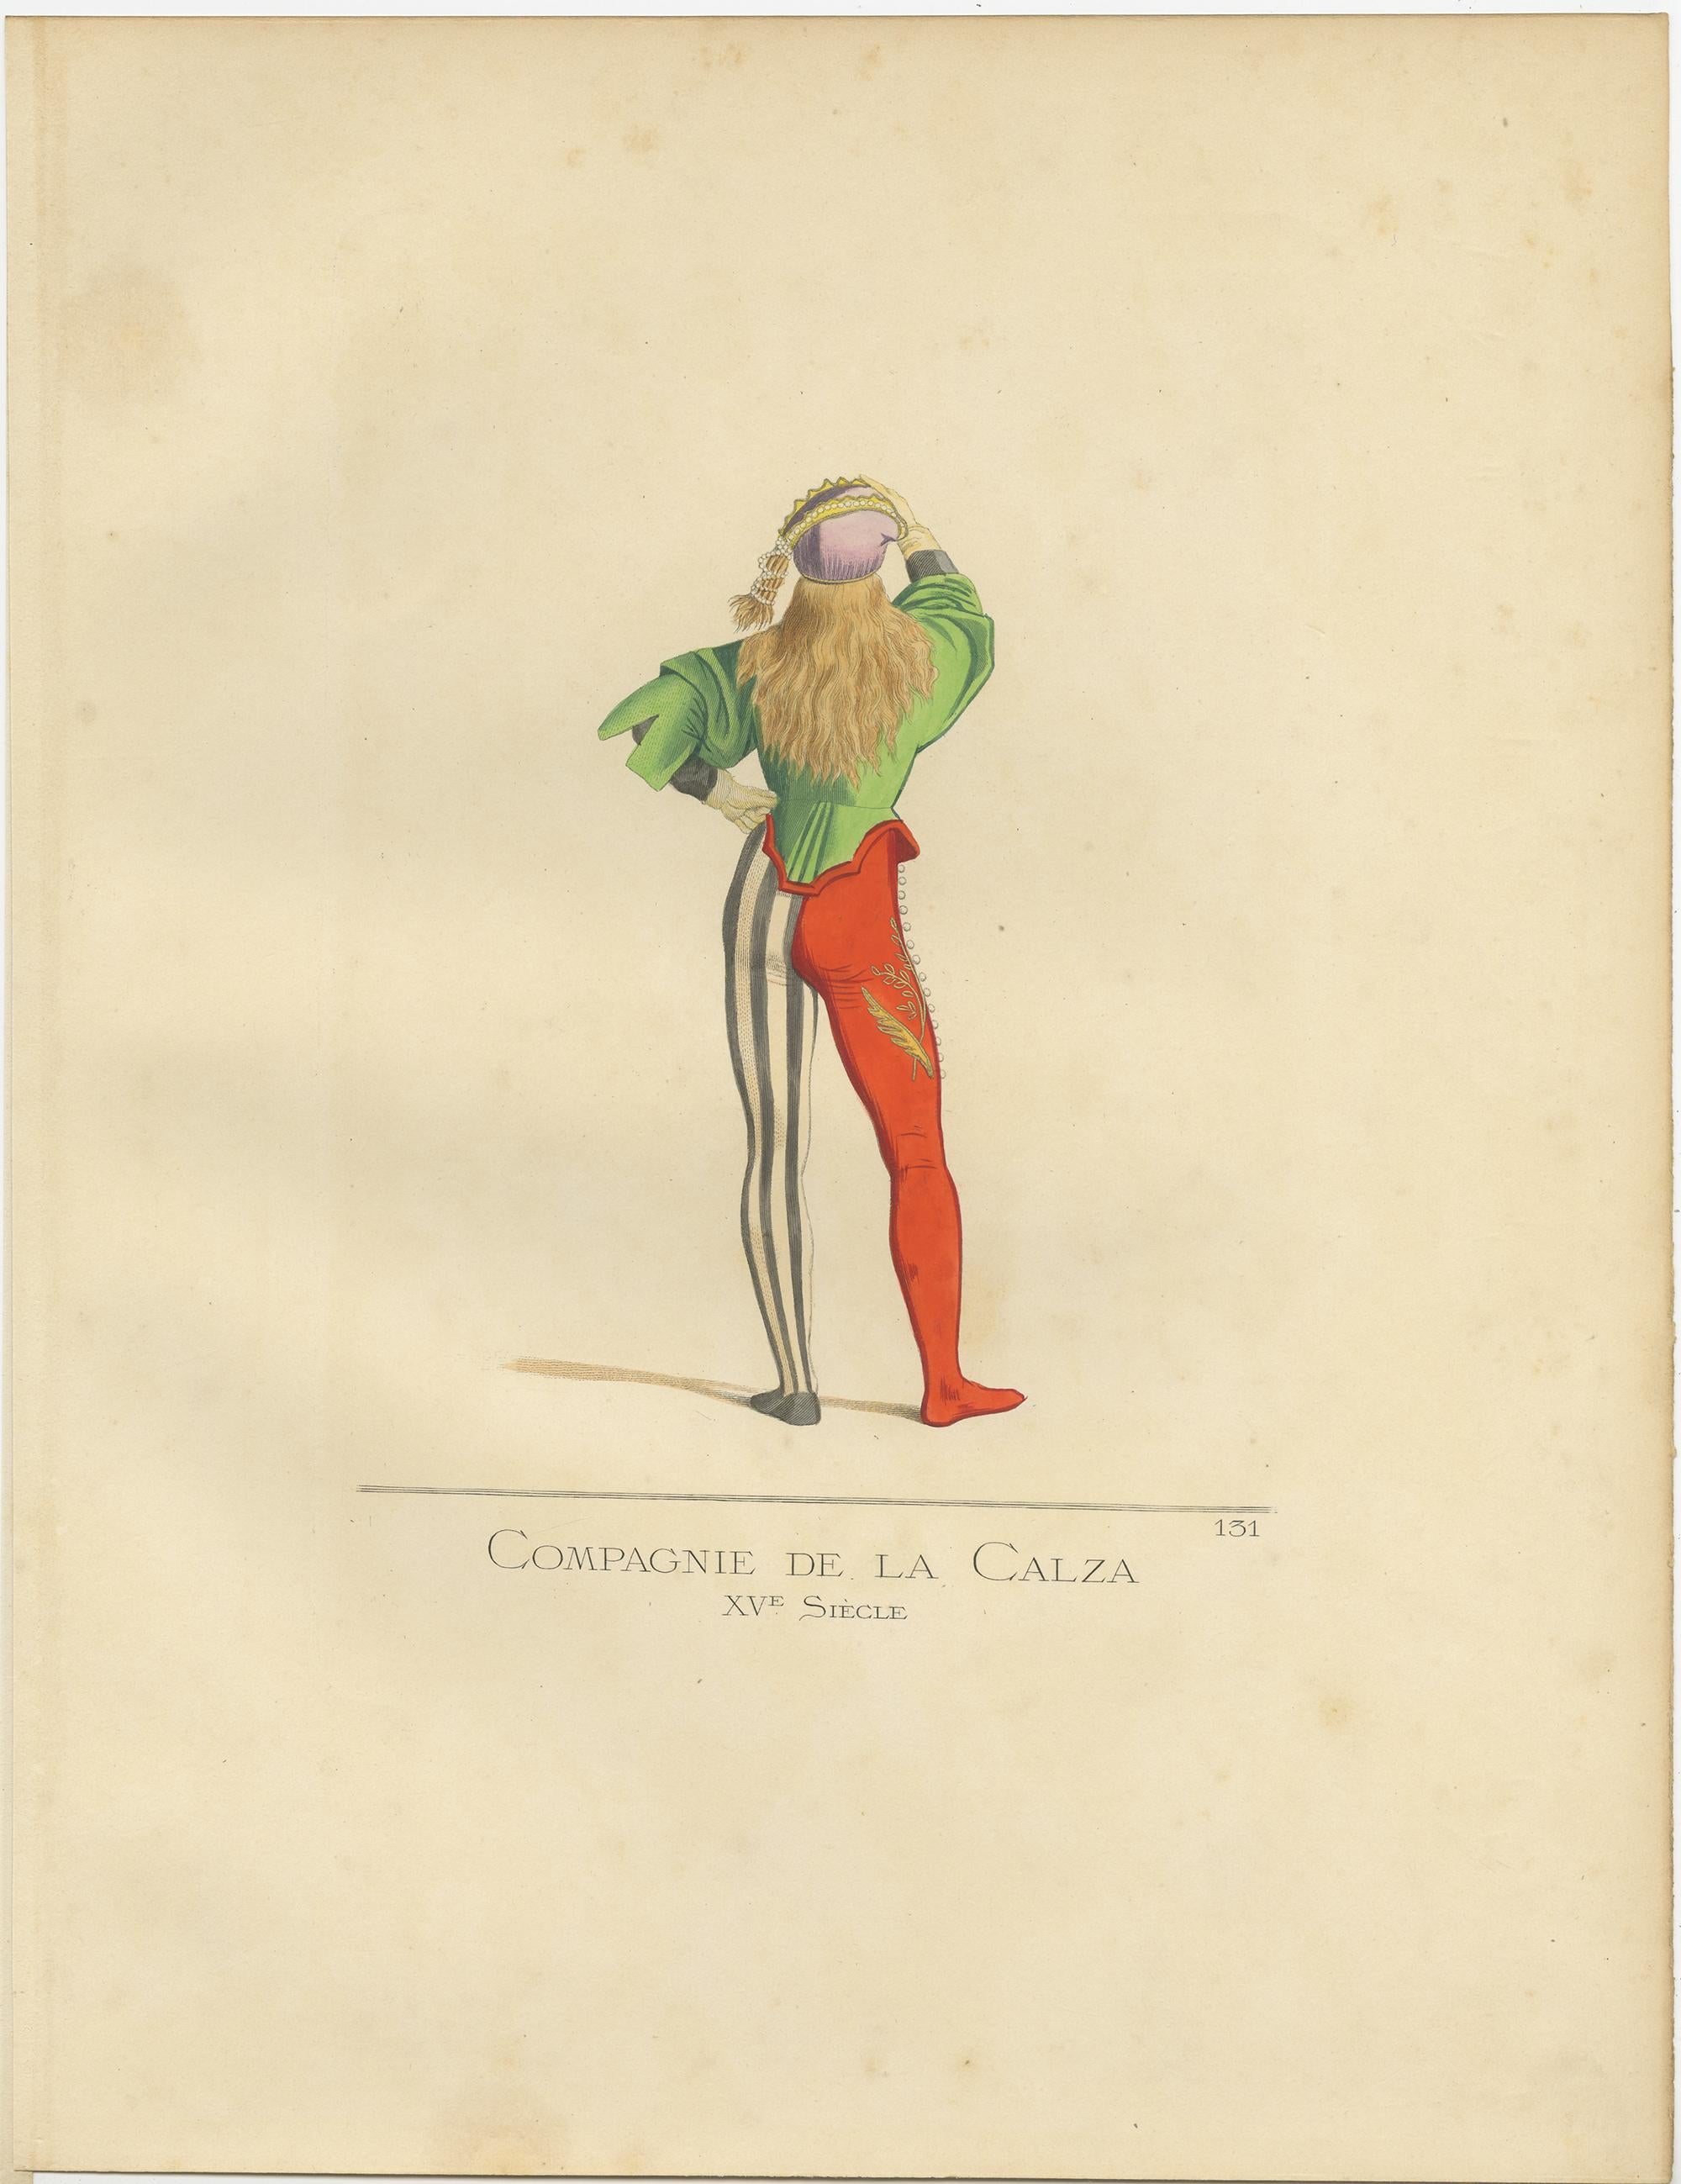 19th Century Antique Print of a Member of the Calza Society, 15th Century, by Bonnard, 1860 For Sale